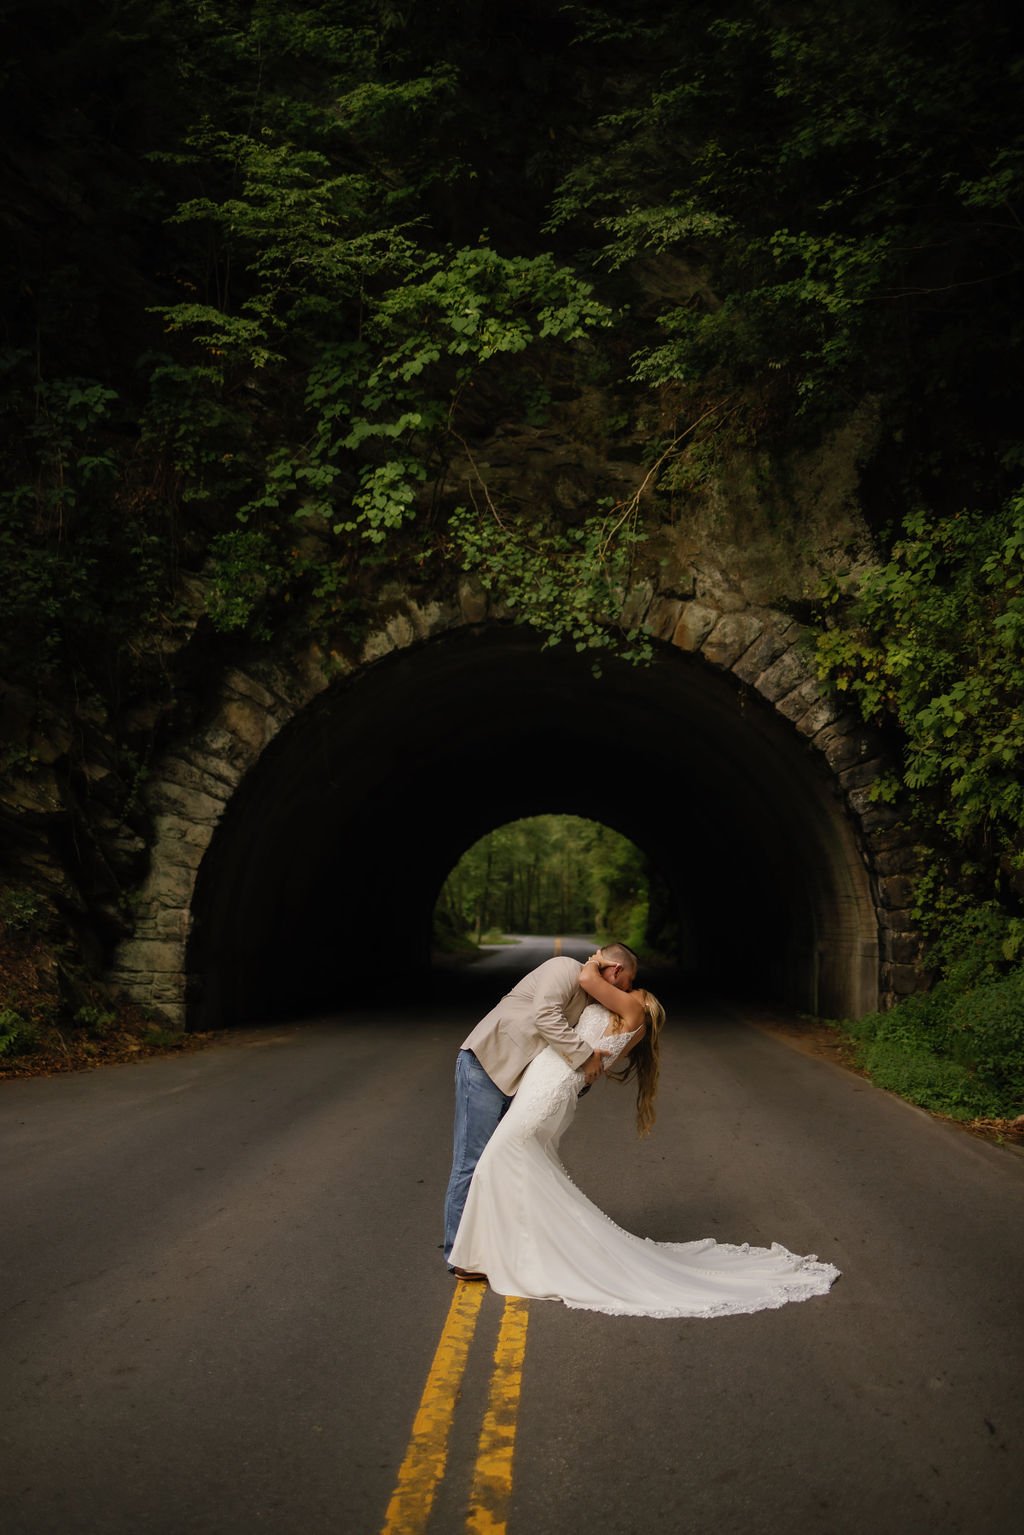 gatlinburg-wedding-photographer-if-uncles-brings-a-camera-to-a-gatlinburg-wedding-couple-kissing-in-front-of-tunnel